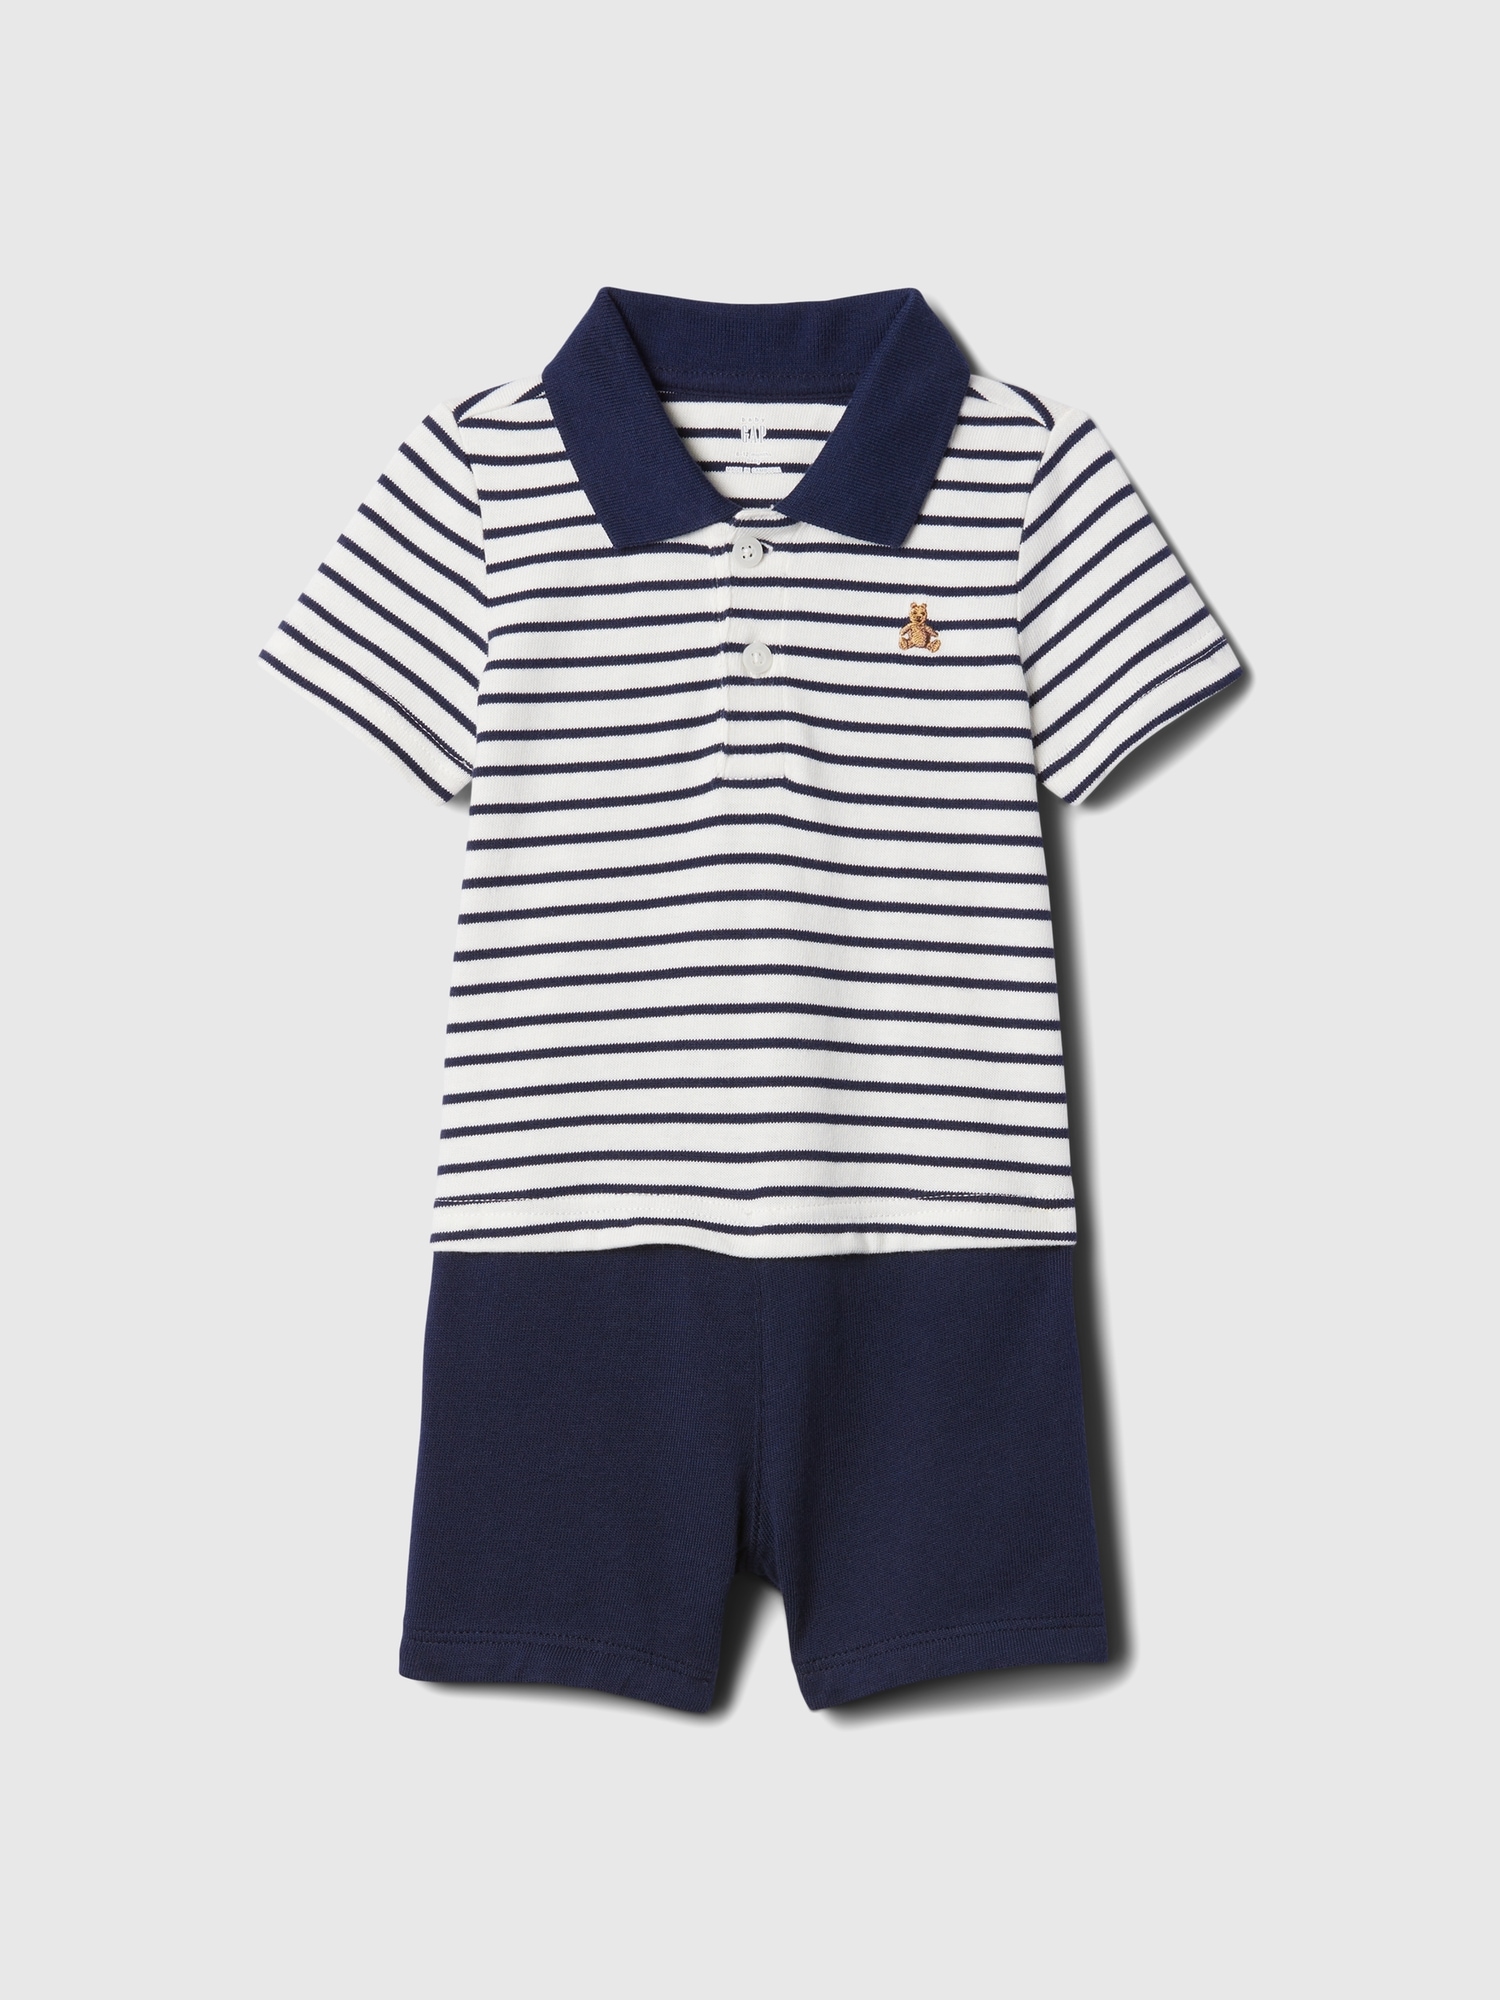 Baby 2-in-1 Polo Shorty One-Piece